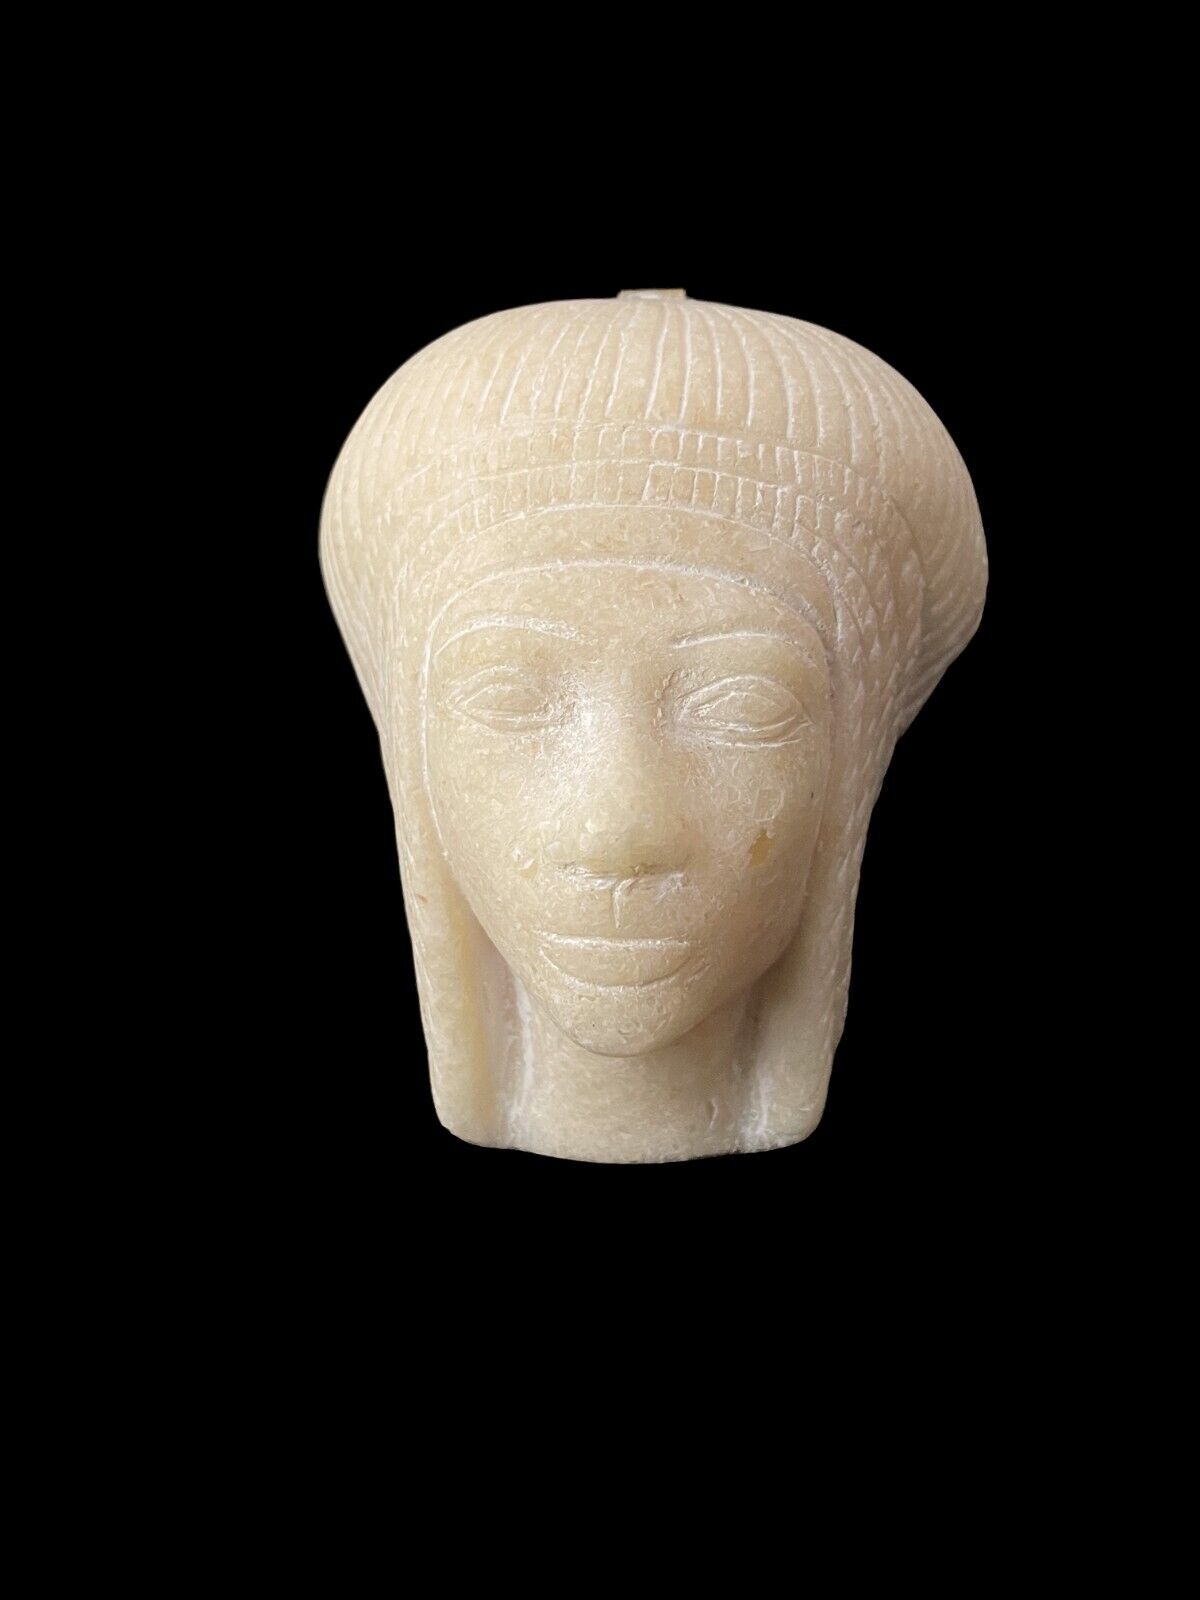 Tetisheri, Ancient Egyptian queen of the 17th dynasty, Queen Tetisheri.